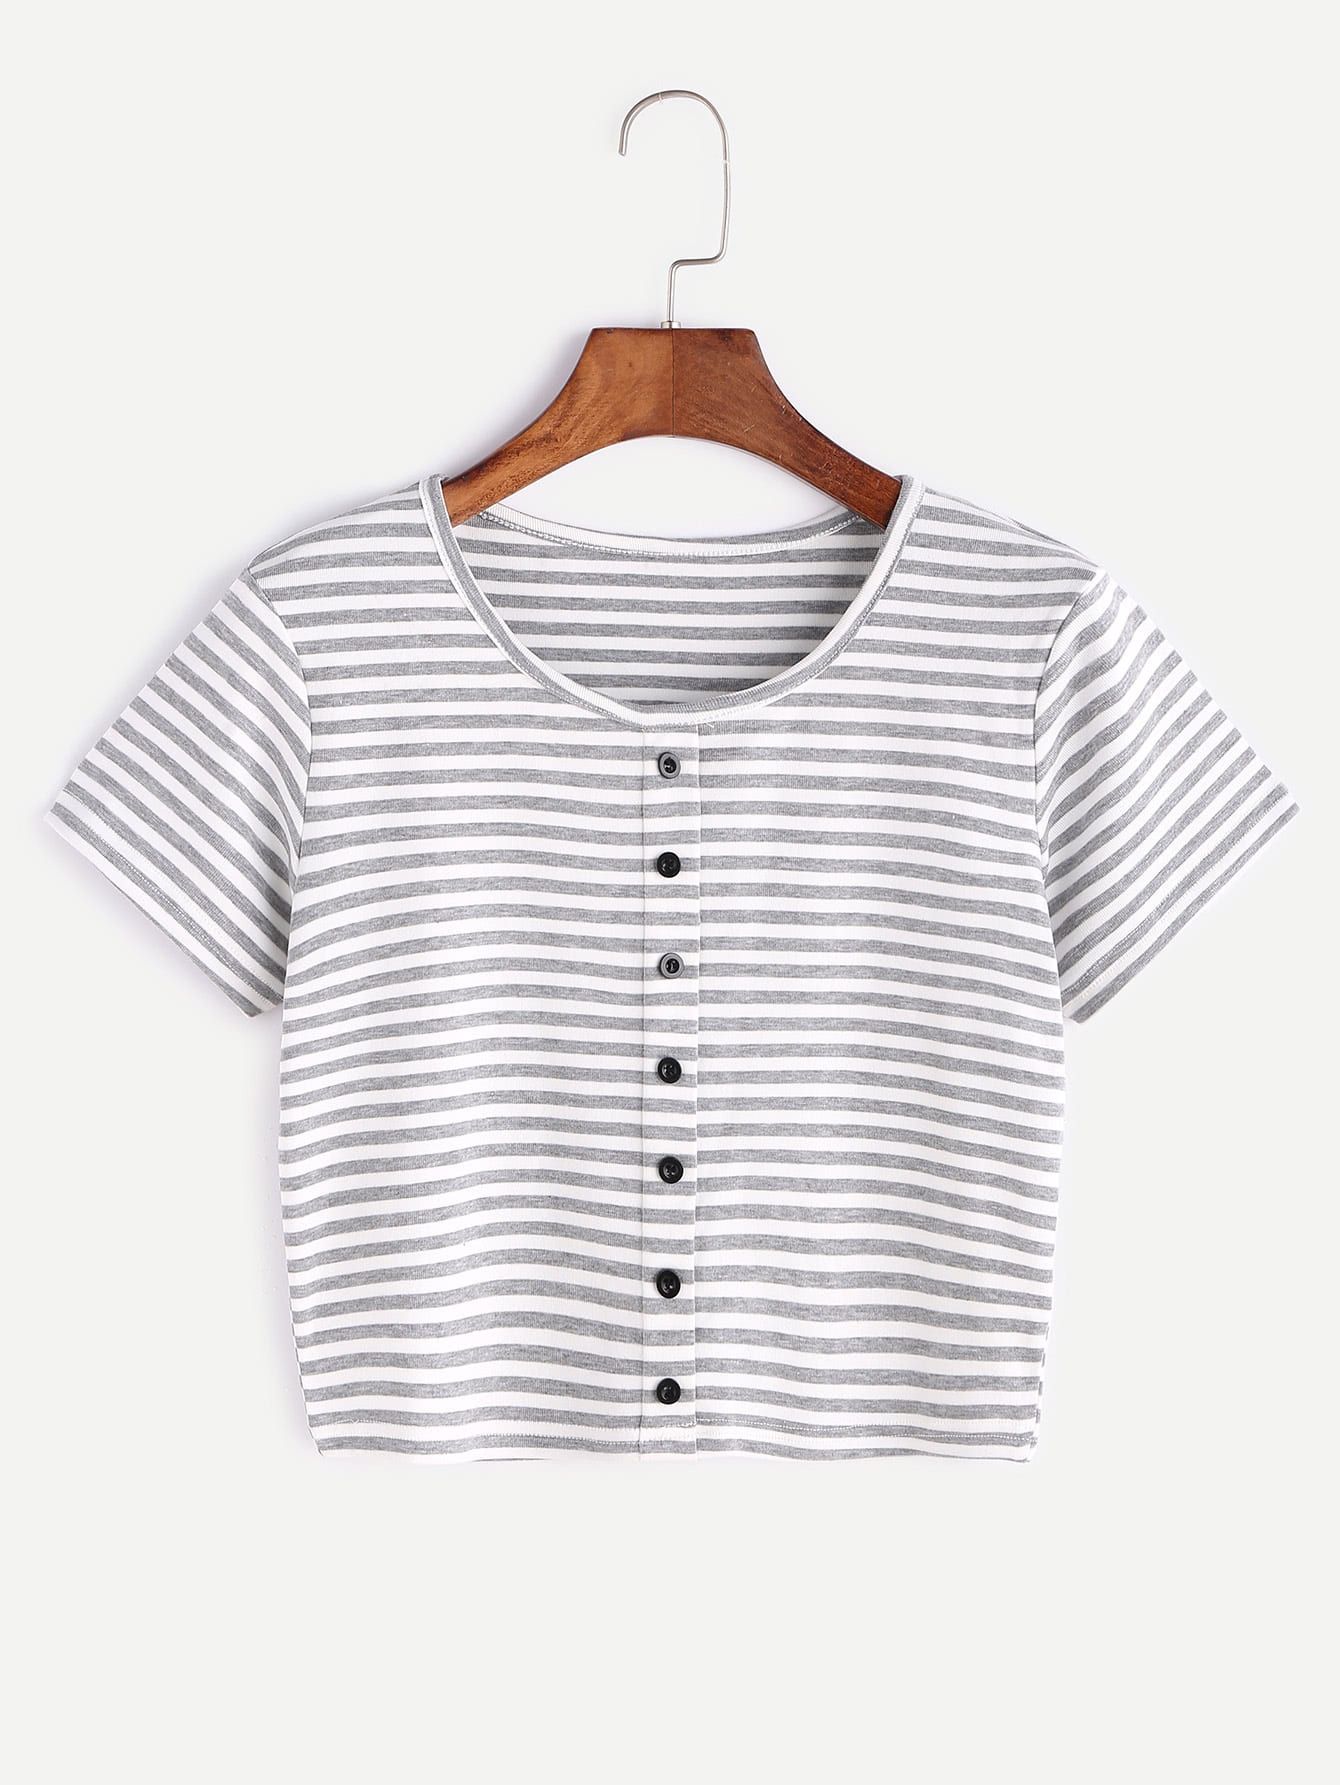 Contrast Striped Crop T-shirt With Buttons | ROMWE